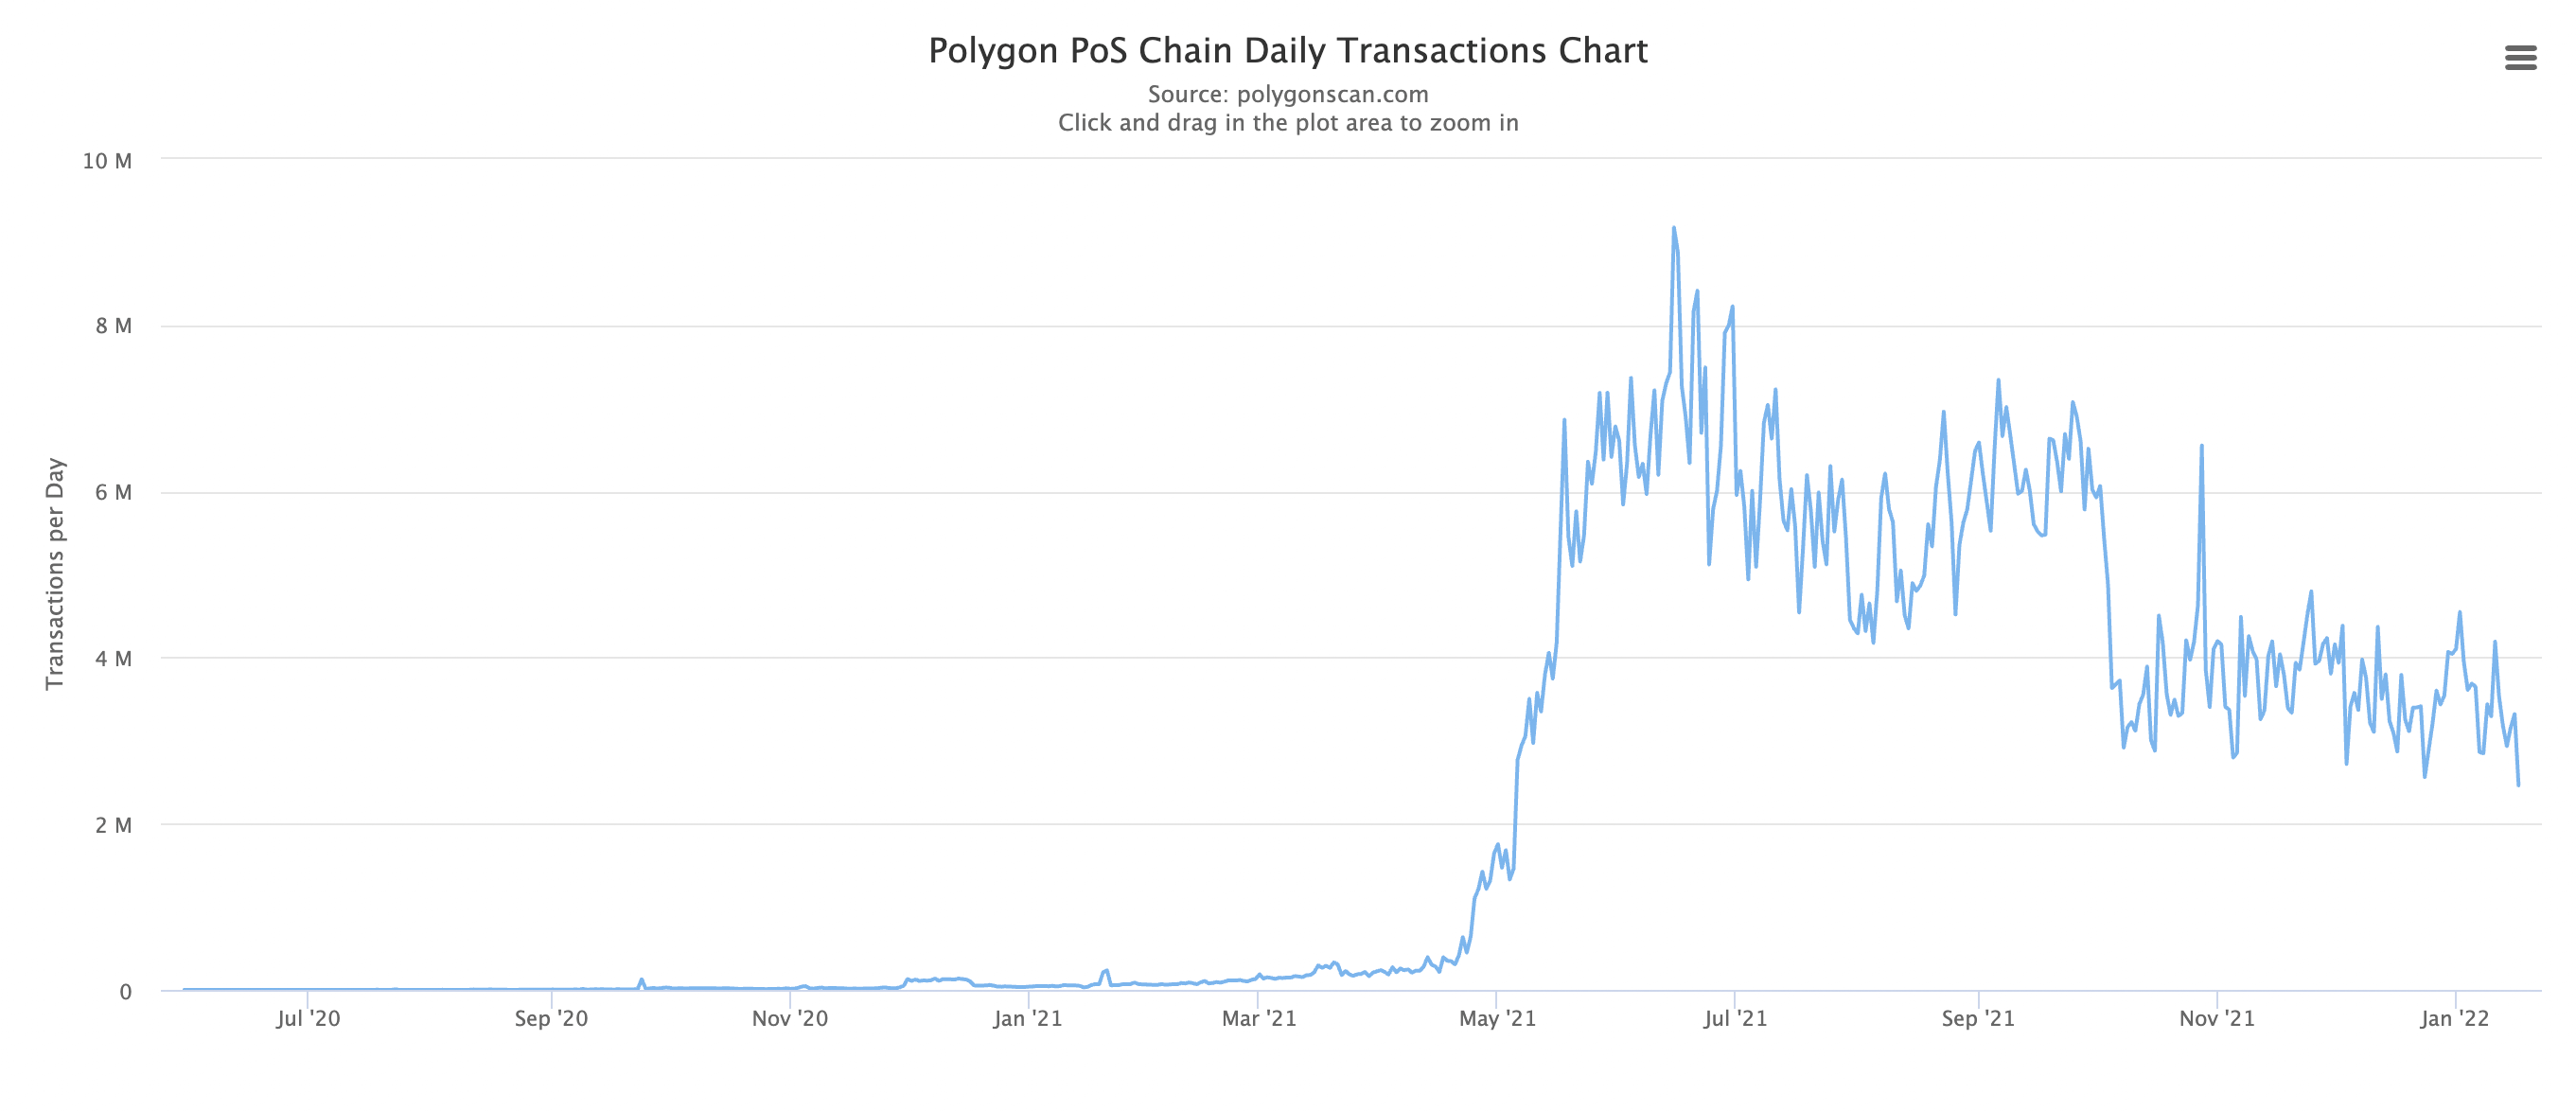 Polygon PoS Chain Daily Transactions - Source: snowtrace.io